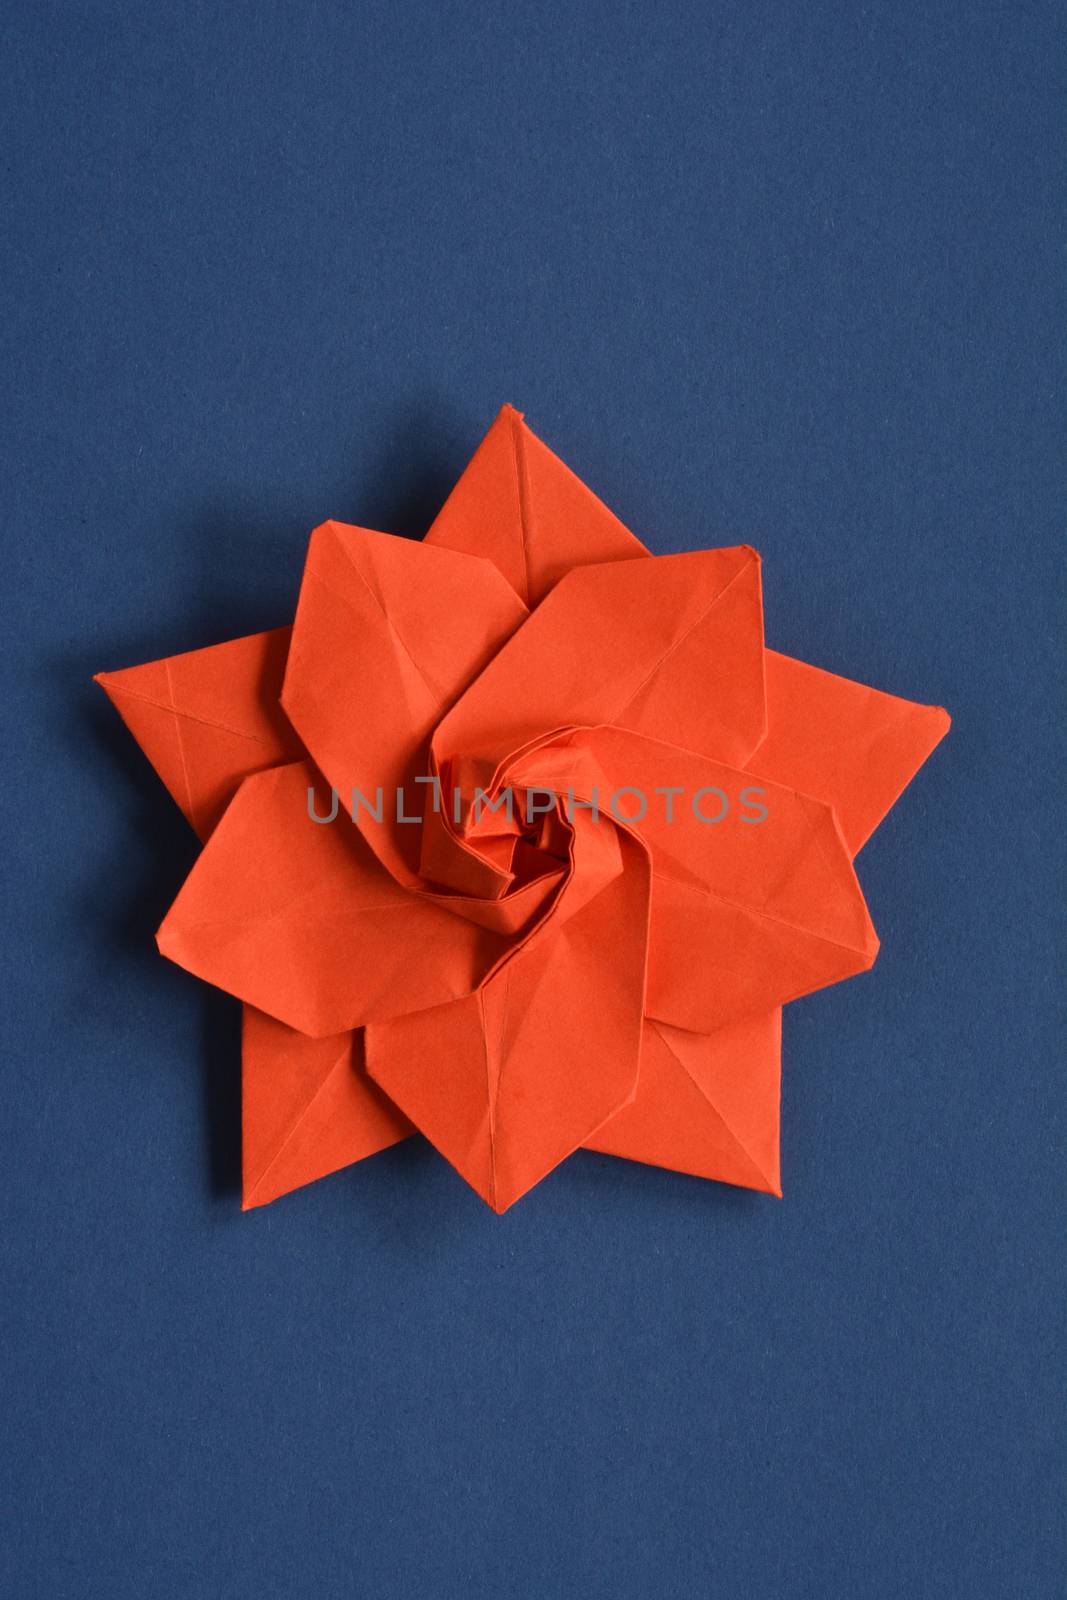 Origami paper star by nahhan